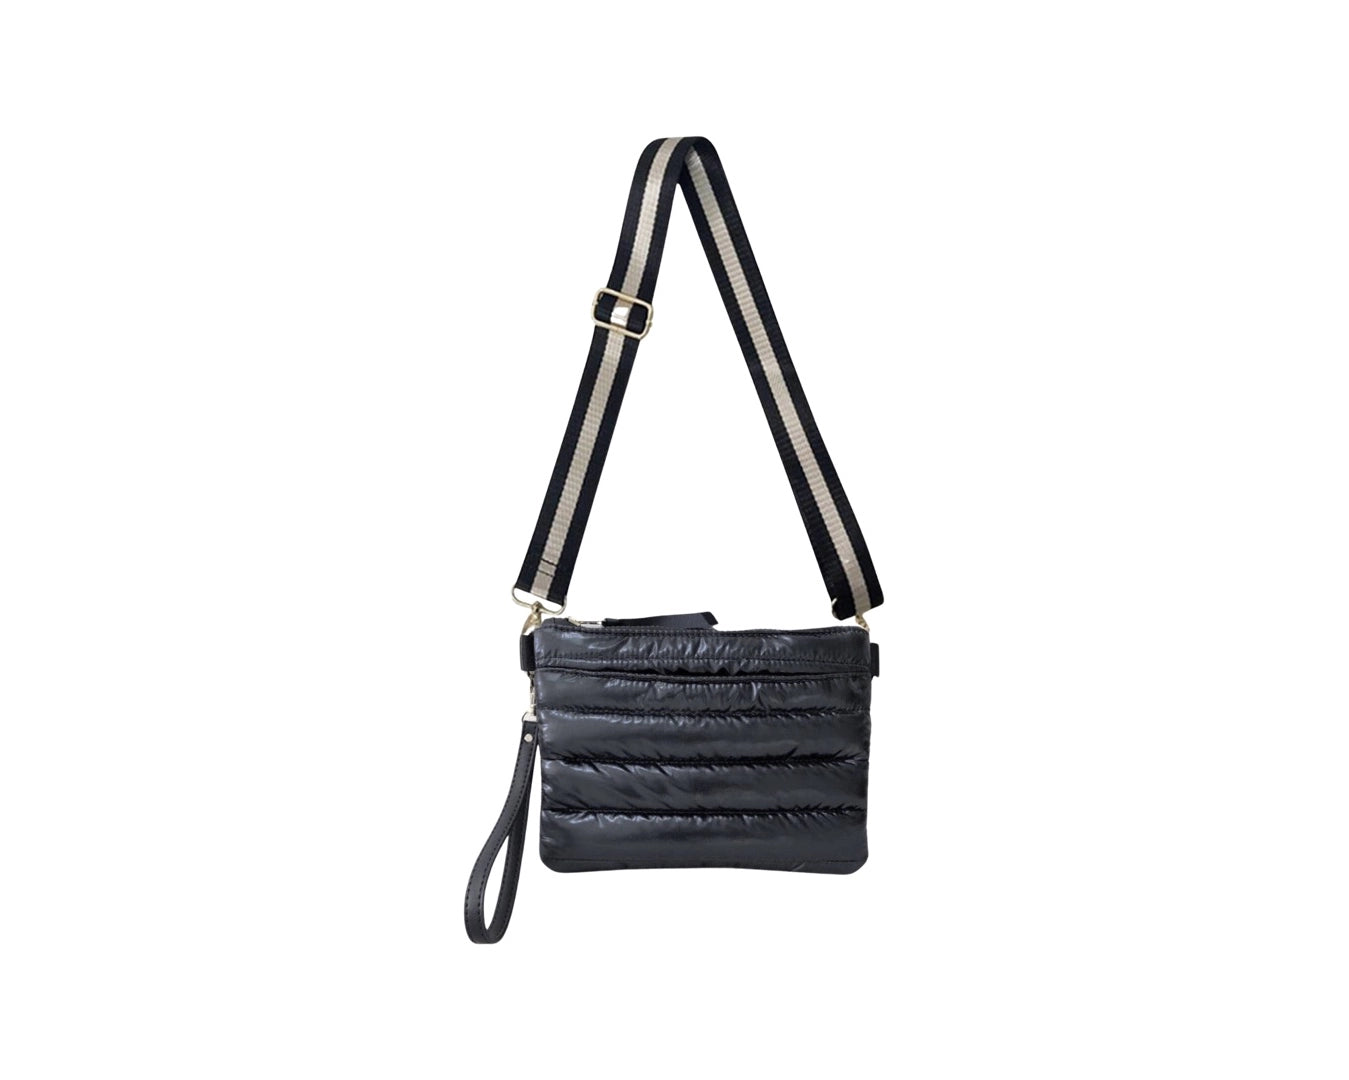 Allie Puffer Black 4 in 1 Bag with Striped Strap